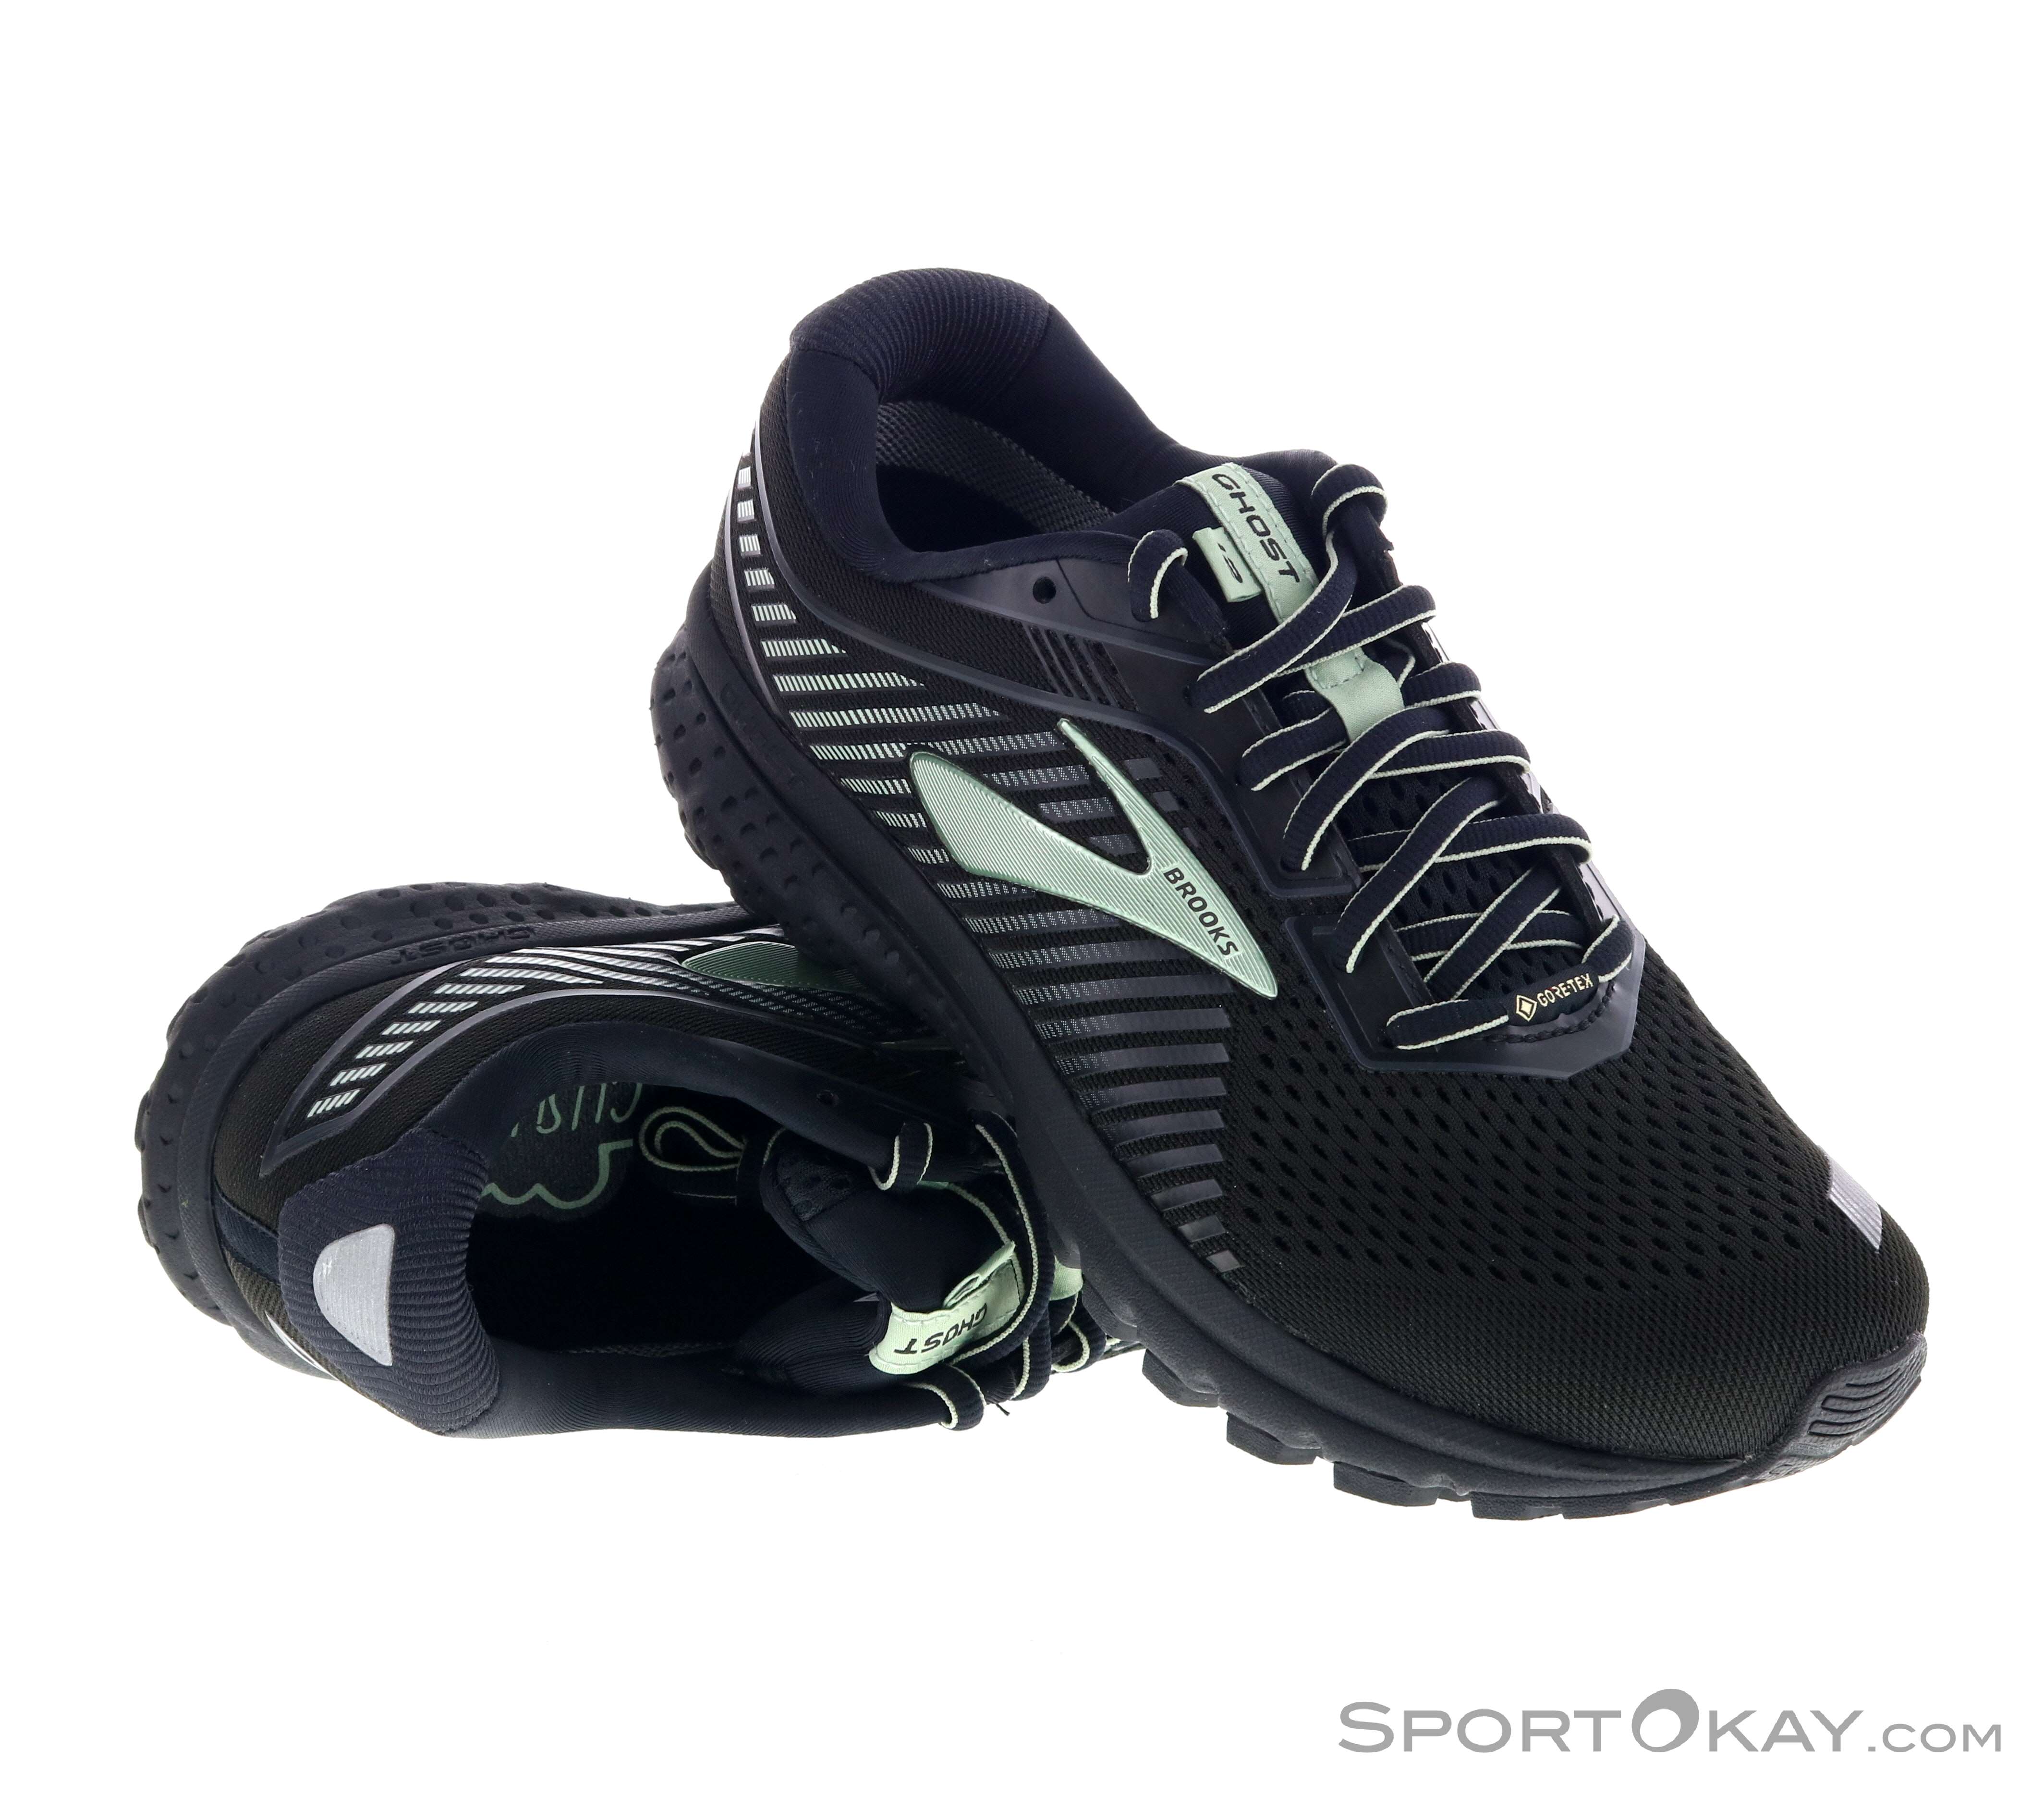 brooks ghost 12 shoes